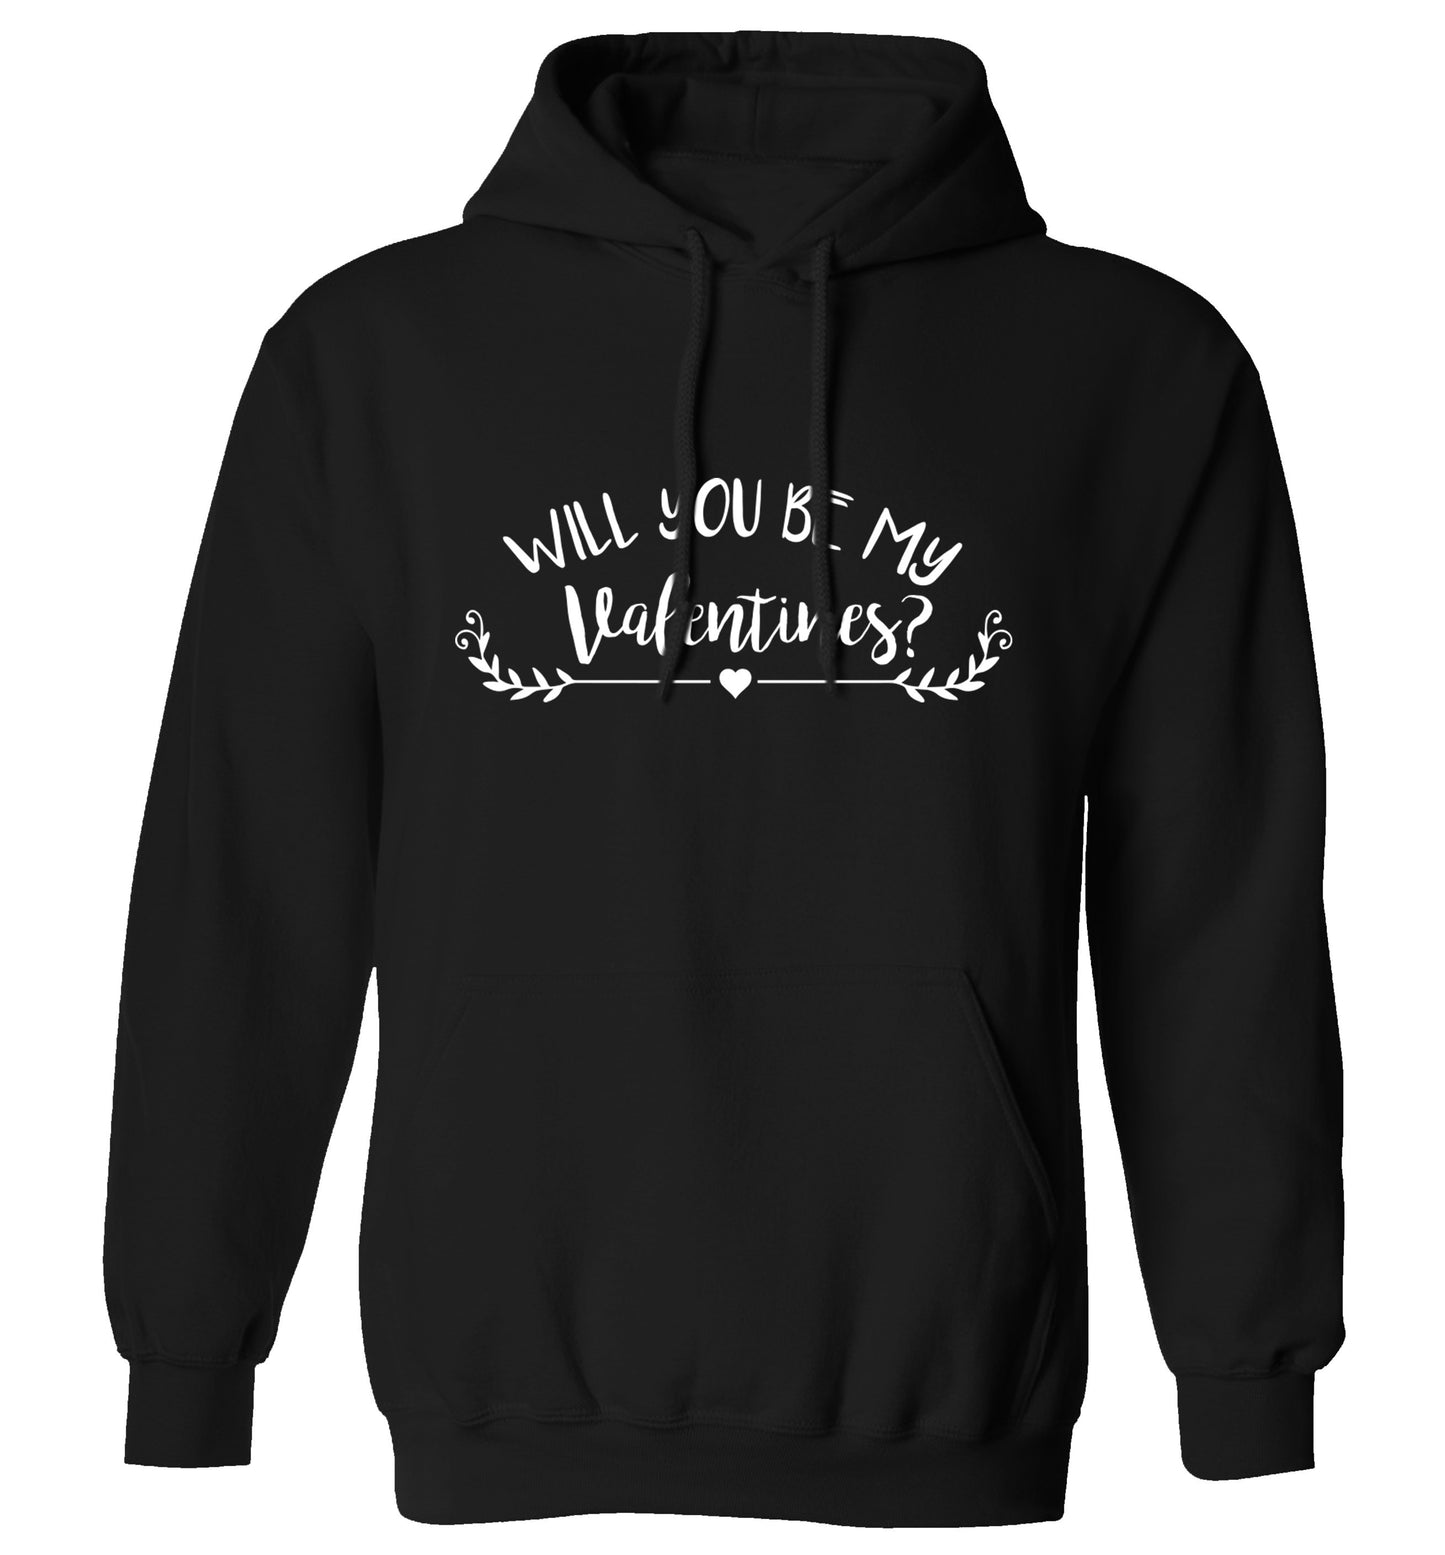 Will you be my valentines? adults unisex black hoodie 2XL